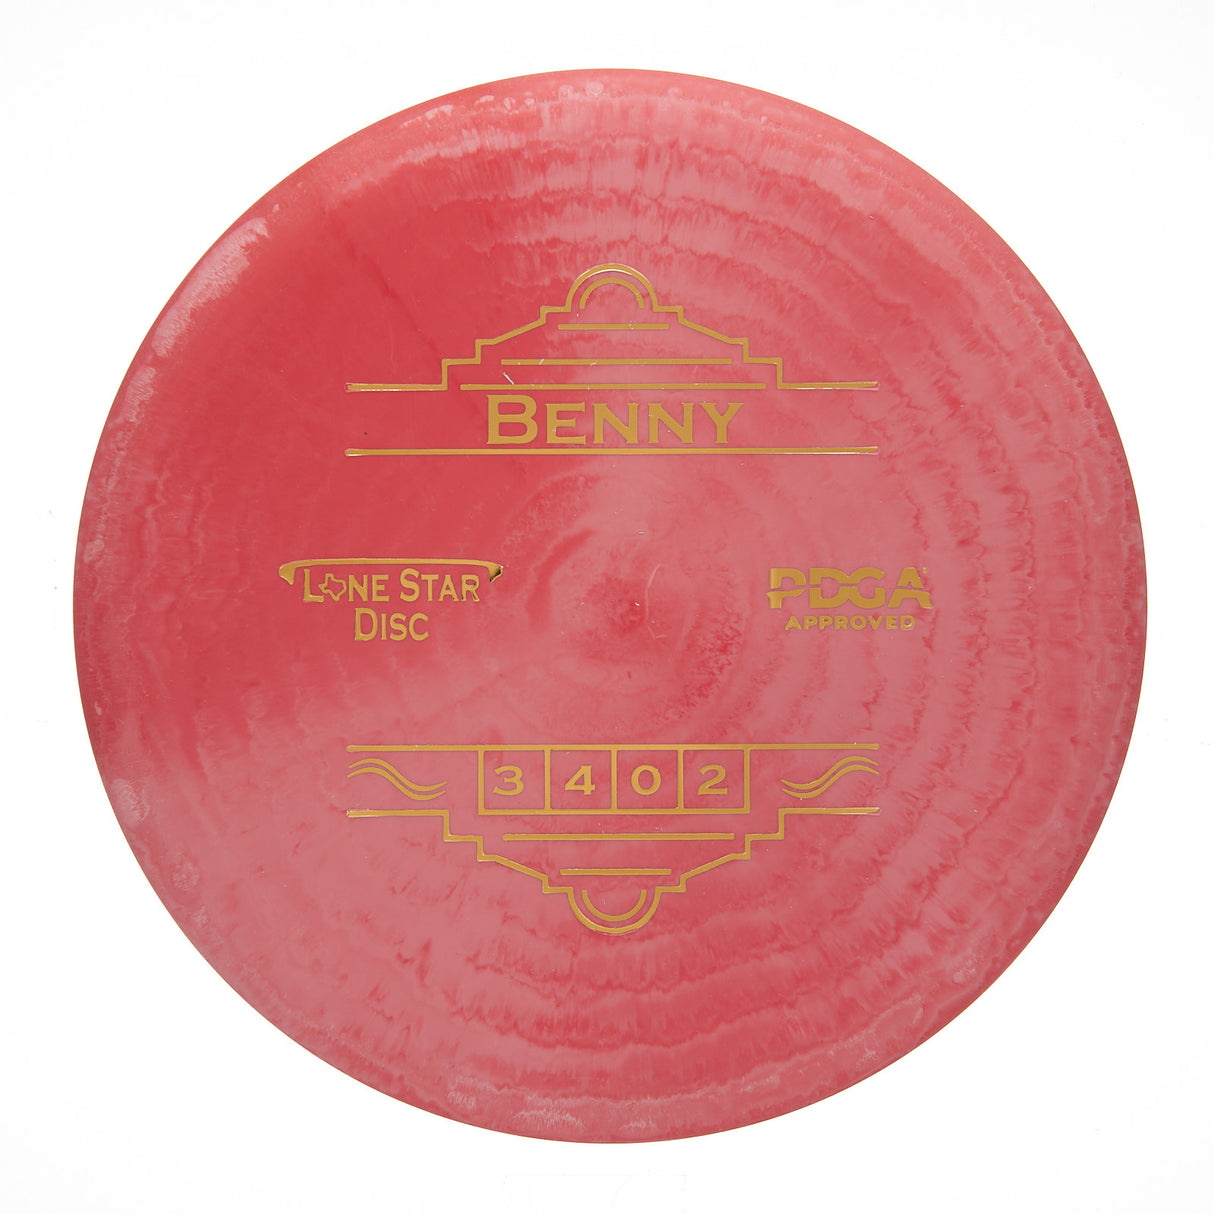 Lone Star Disc Benny - Delta 2 169g | Style 0002